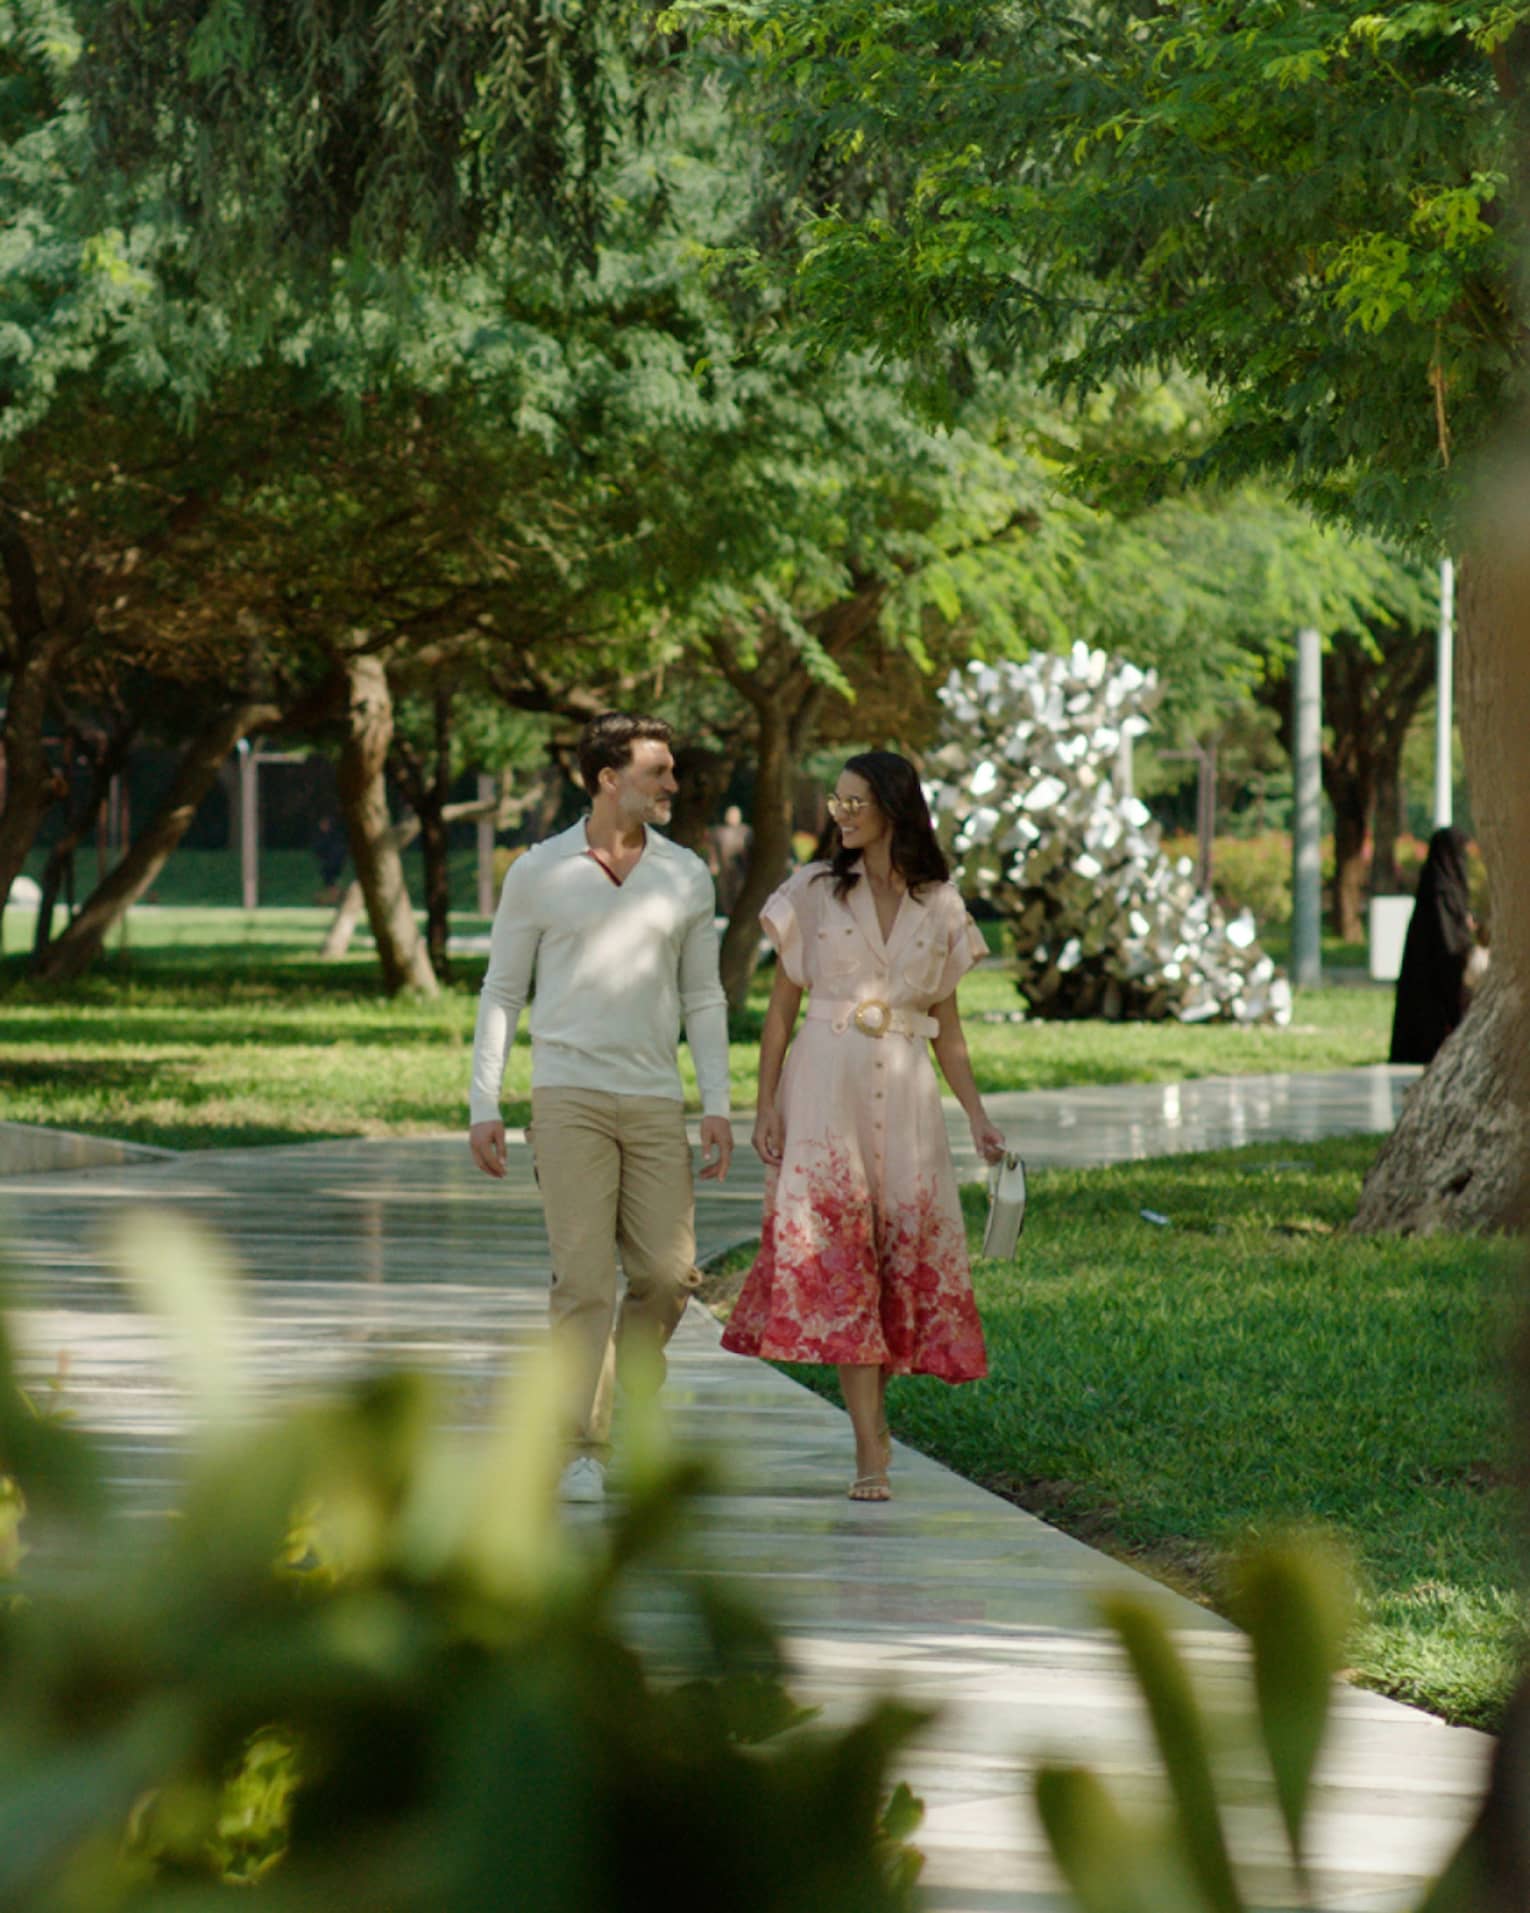 Couple walks along pathway surrounded by flora and fauna